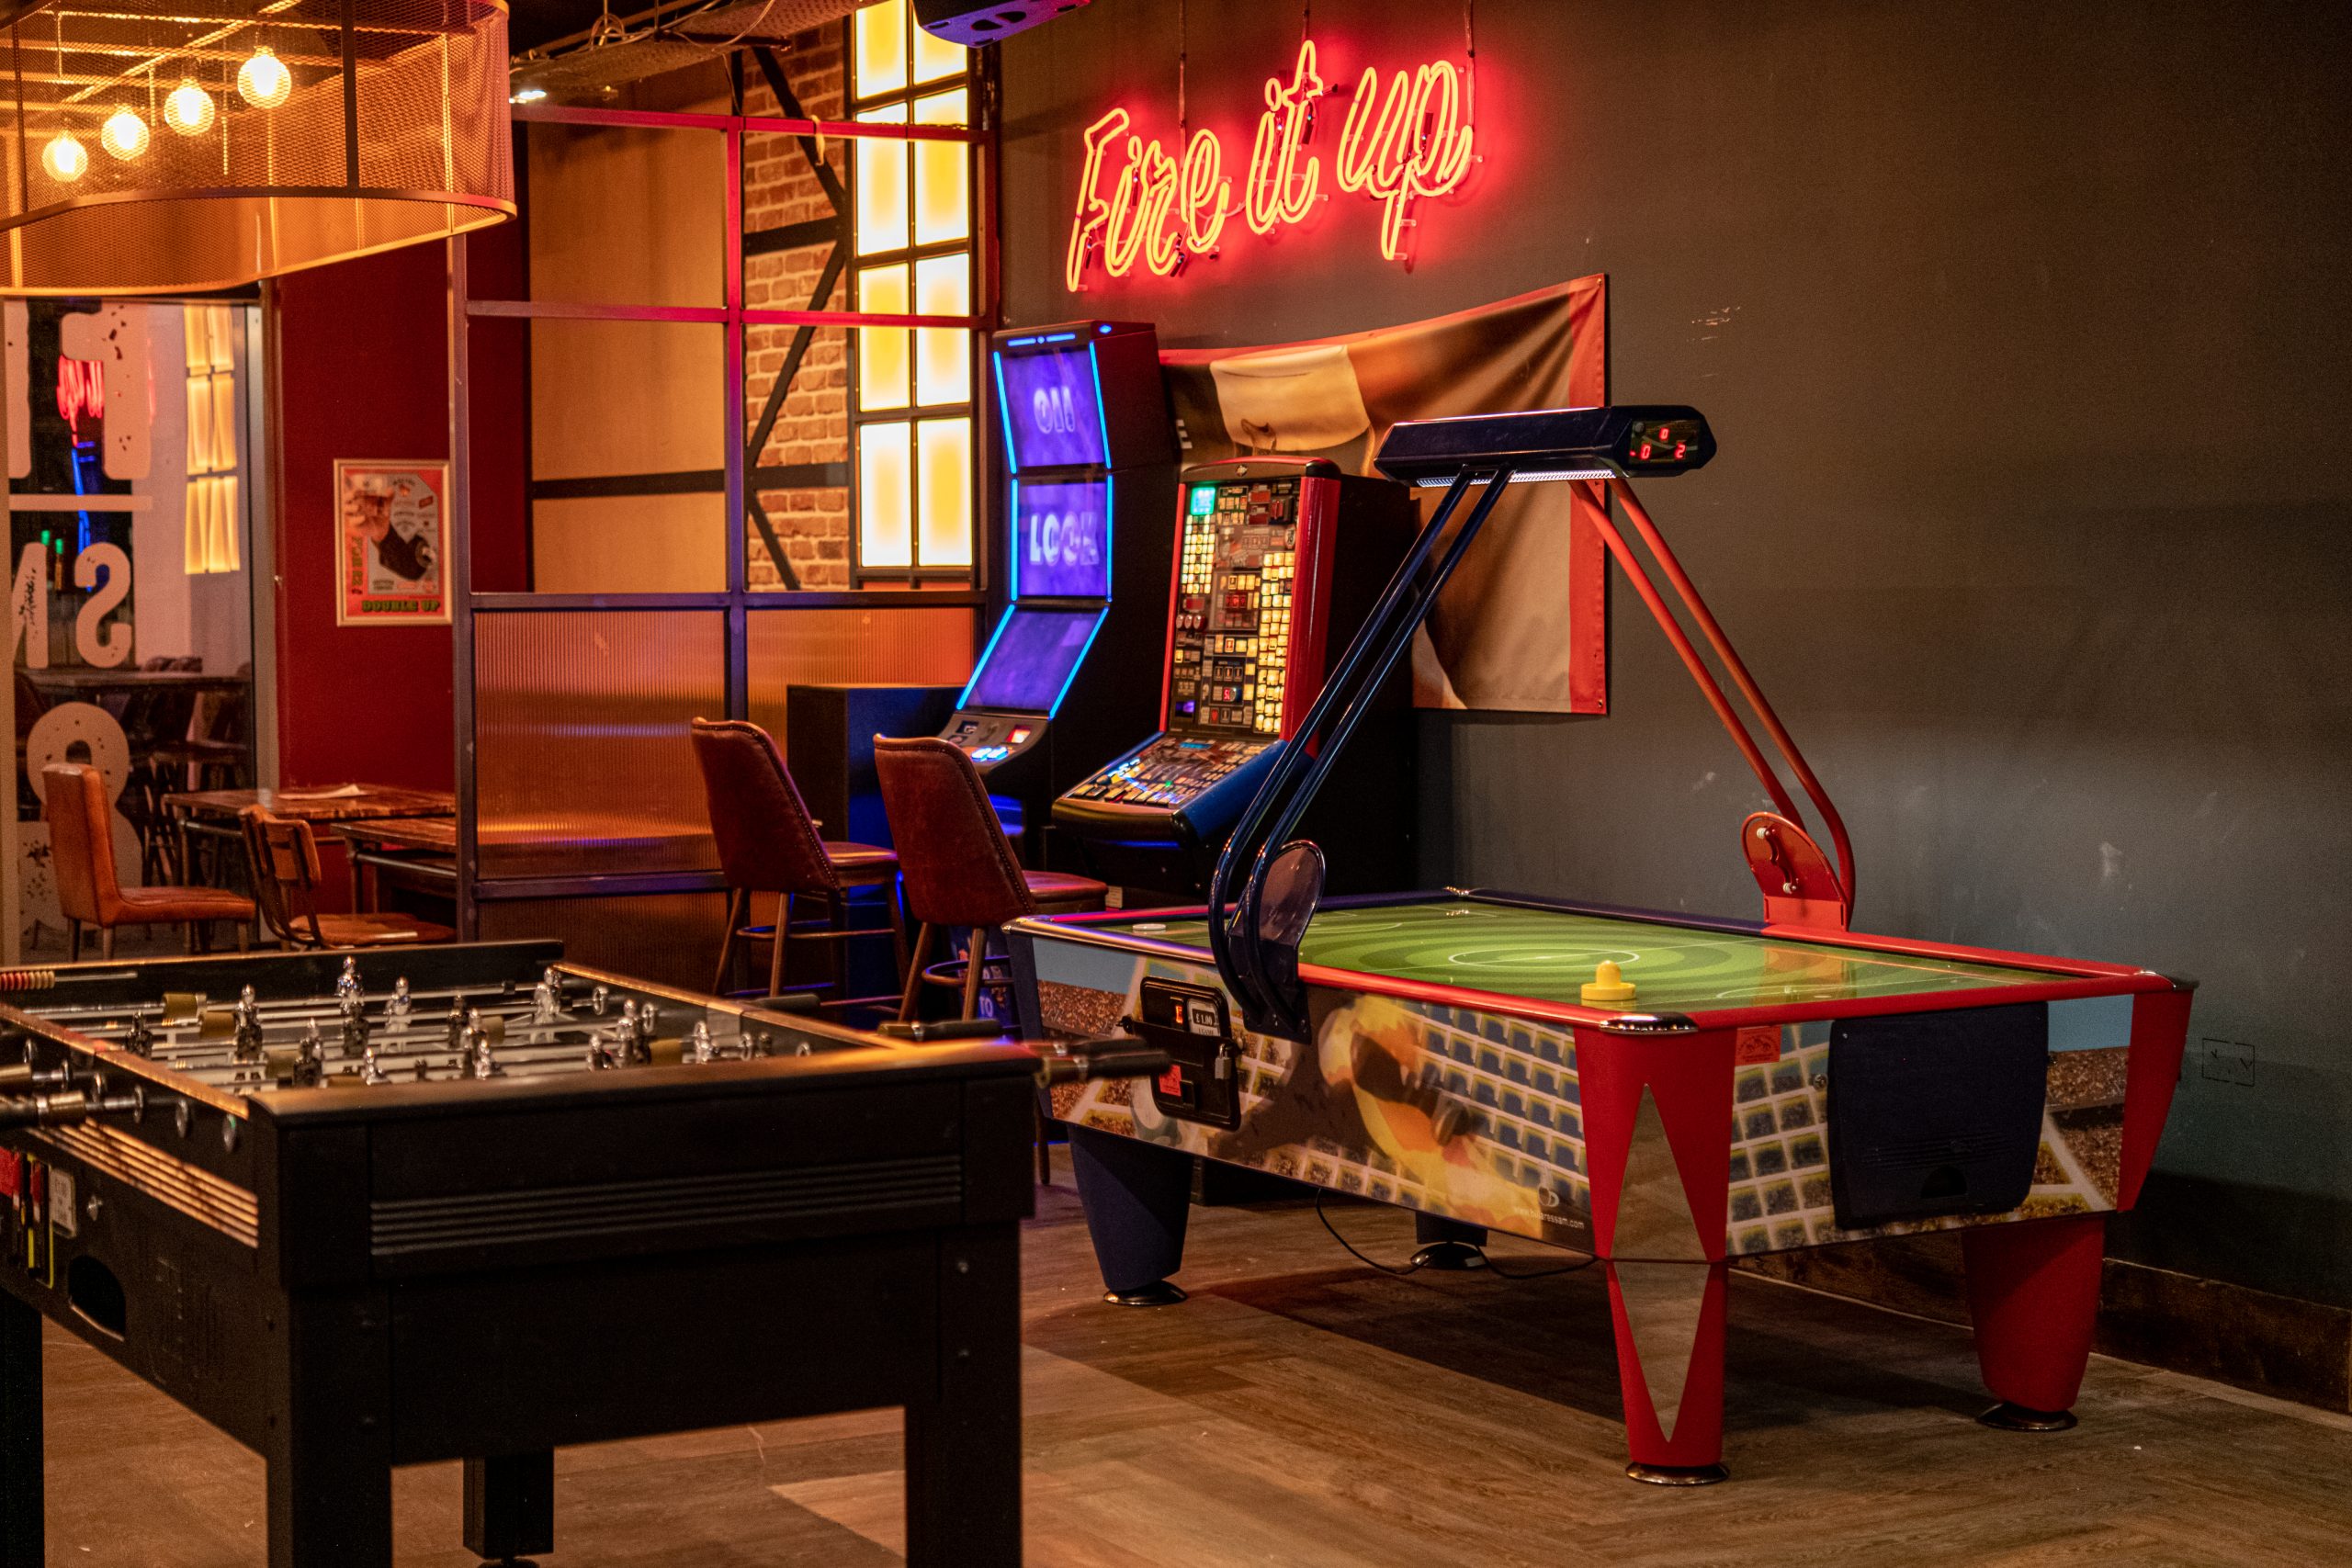 Enjoy a game of air hockey with friends at Firepit bars